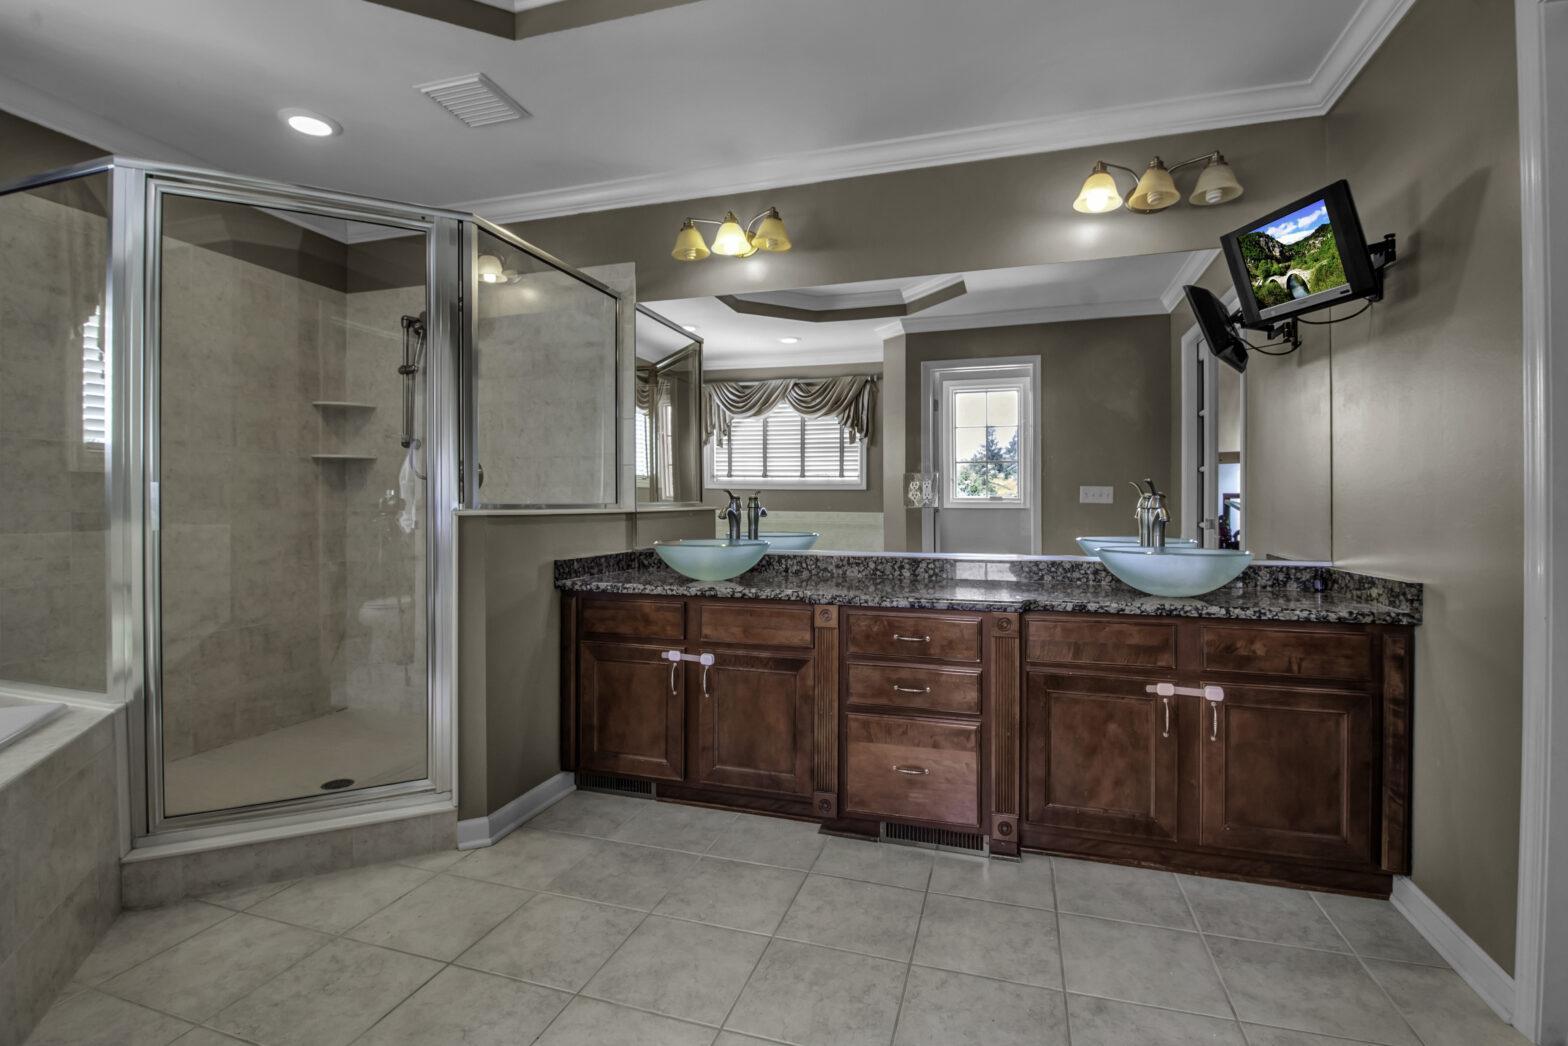 Complete Guide: Choosing Bathroom Remodeling Contractors in Buffalo NY - TBrothers Renovations